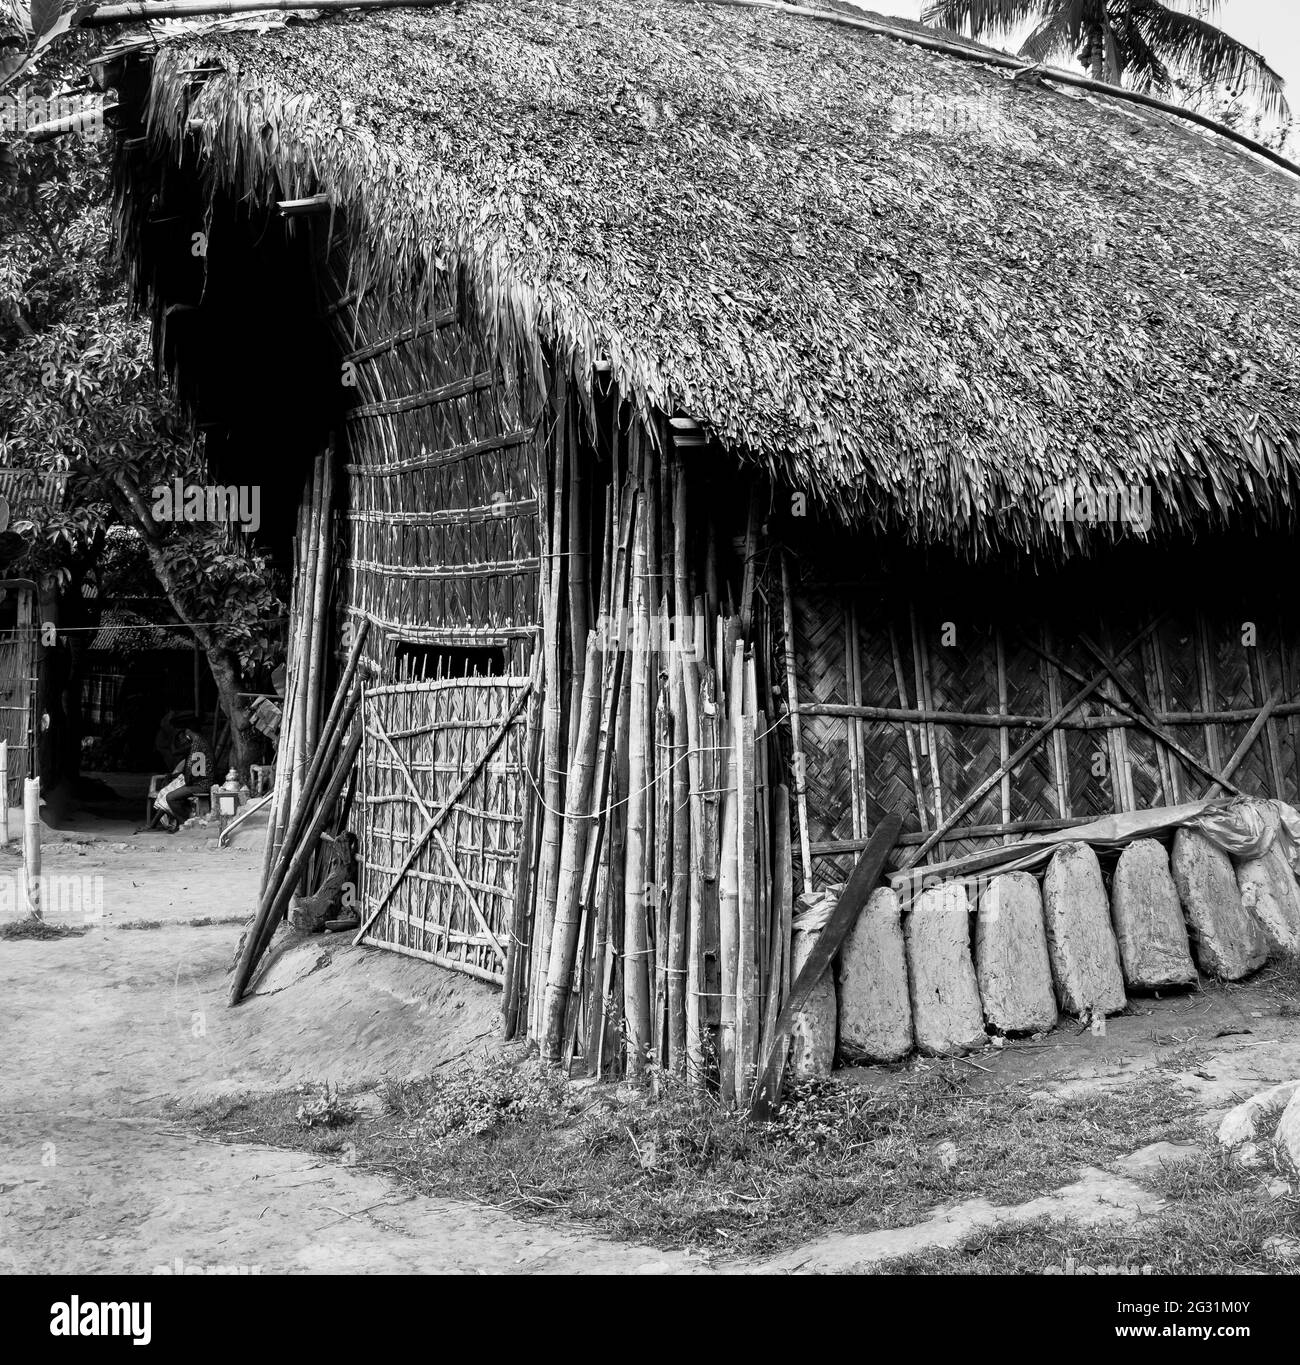 A straw house and pottery. This image captured on March 30, 2021, from Shekhornagar, Bangladesh, South Asia Stock Photo